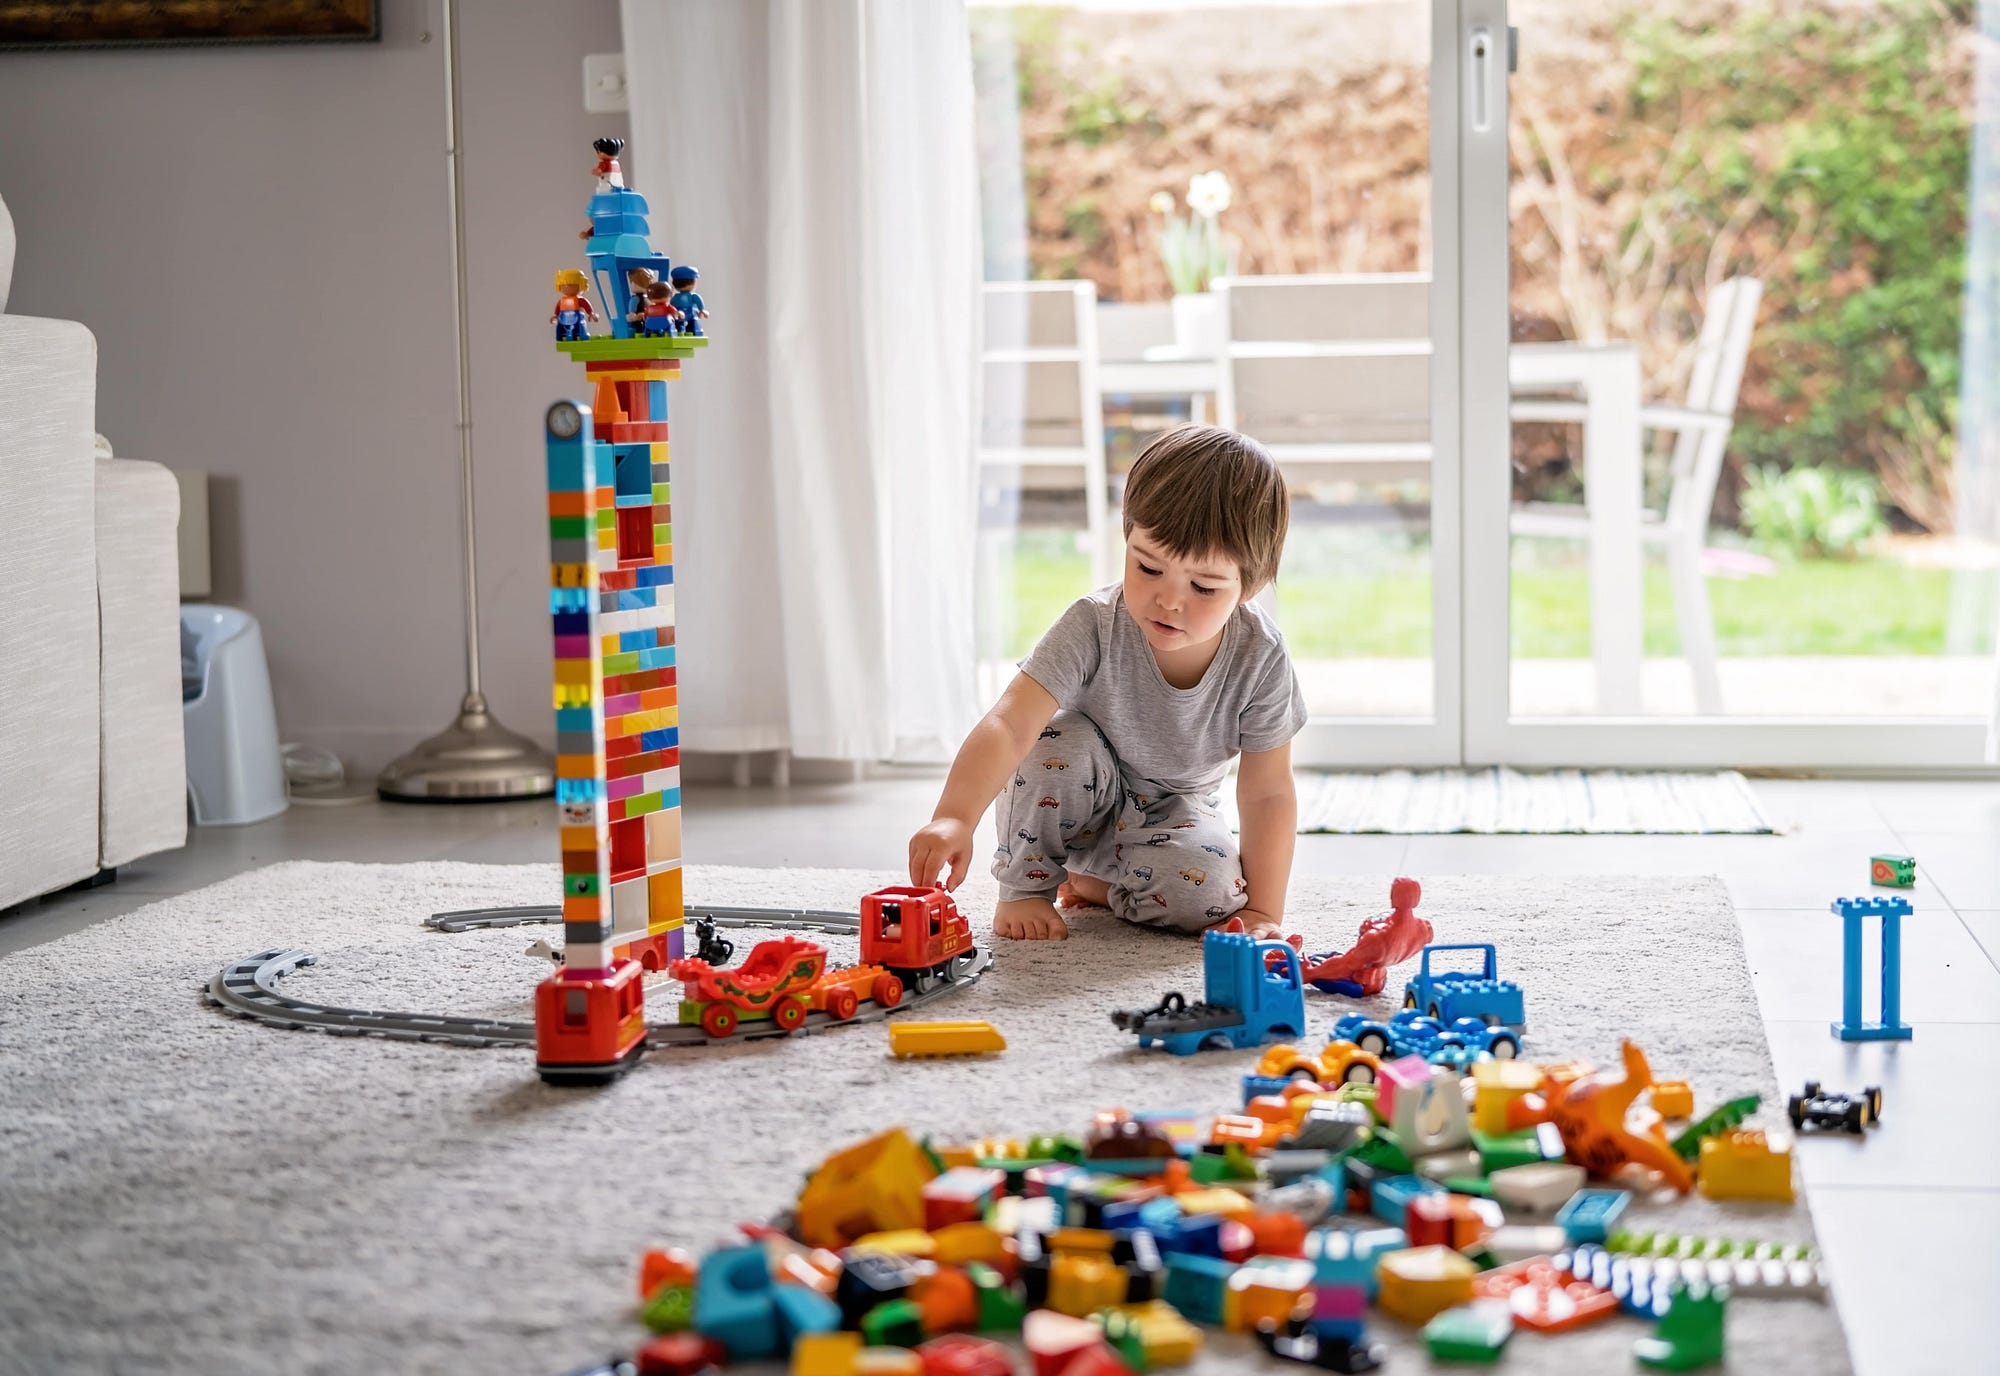 LEGO's success — defining moments | by BRAND | Medium